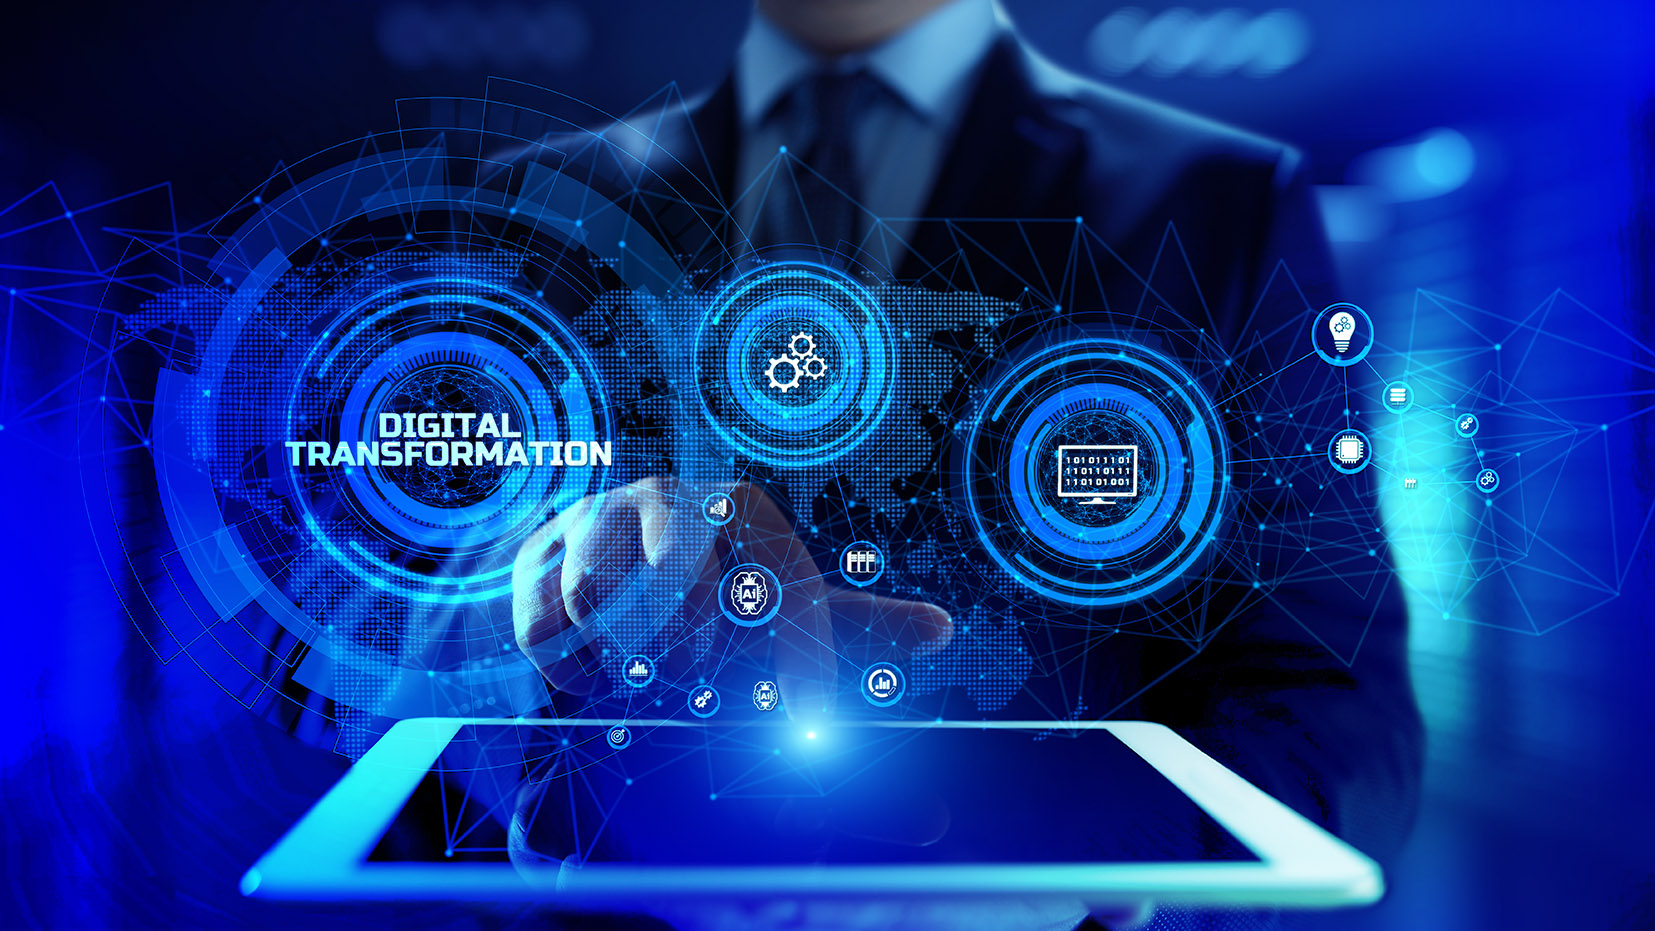 Digital transformation - definition, opportunities and threats